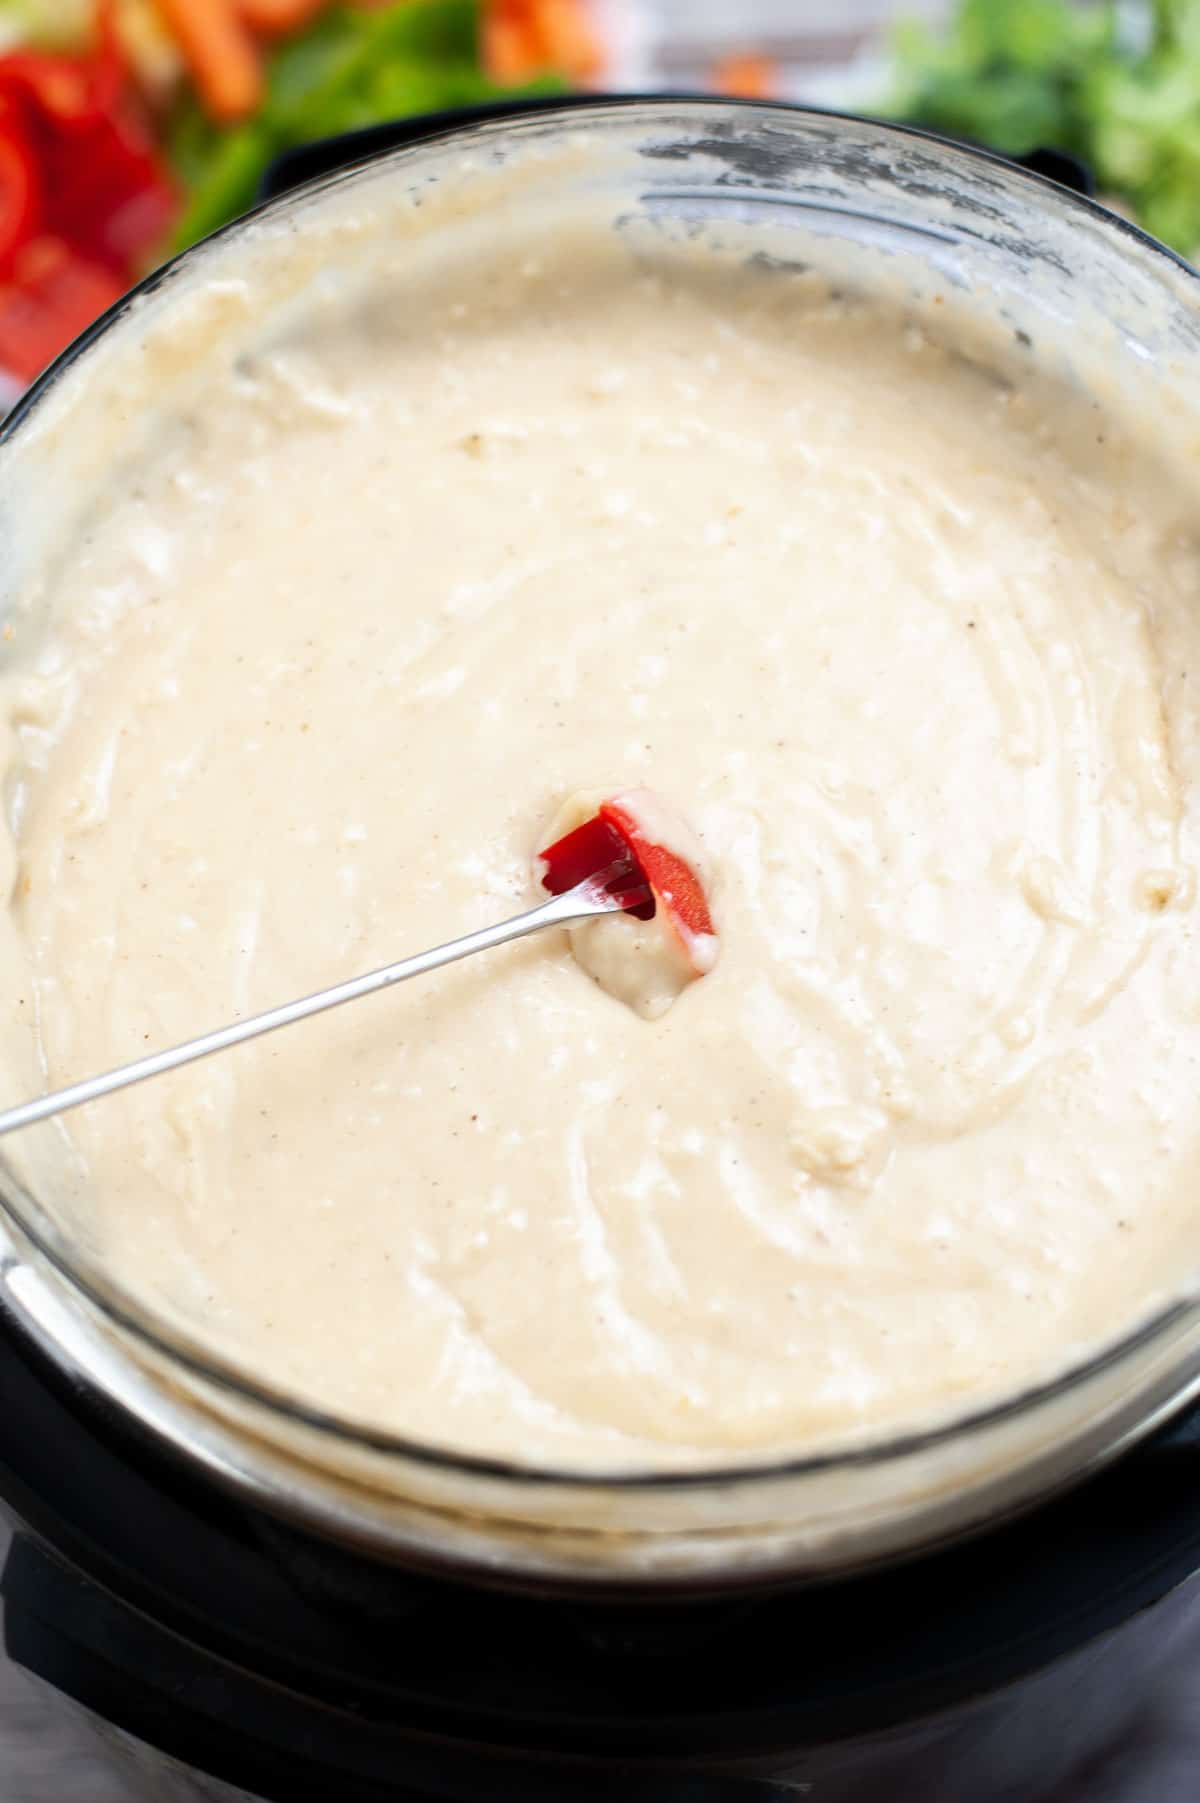 A skewer with a sliced red pepper being dipped into cheese fondue in a instant pot.